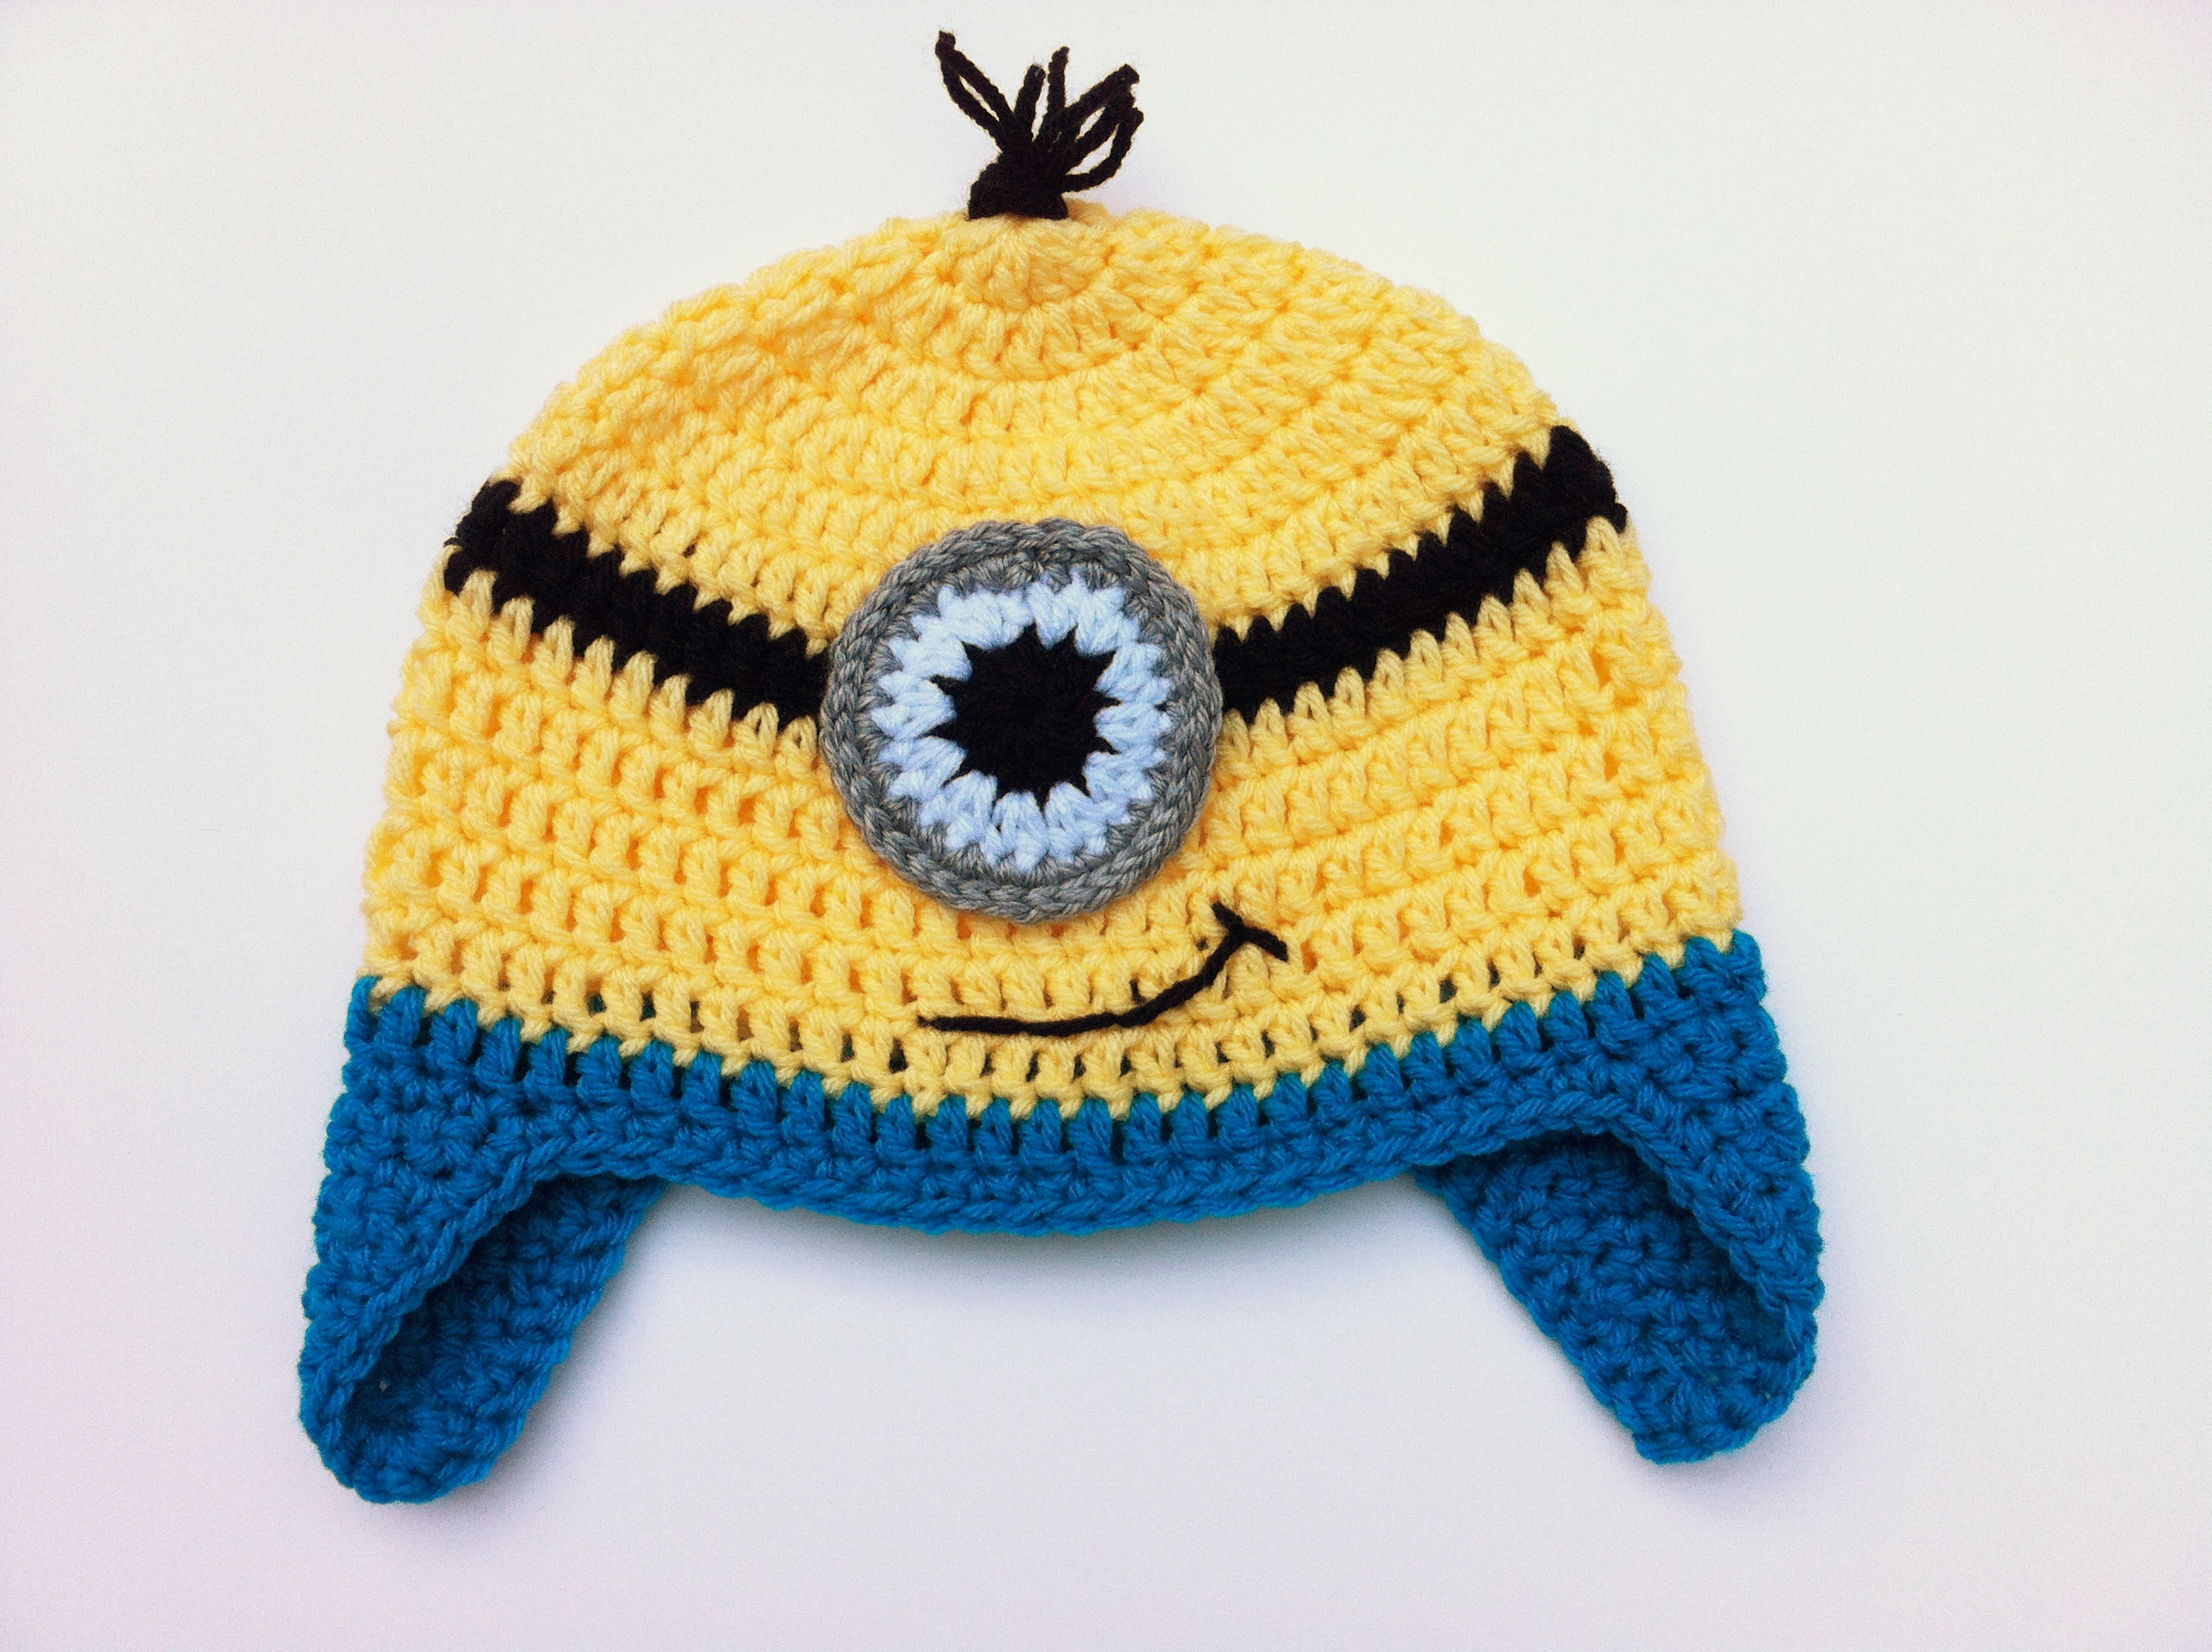 Knitting Patterns For Minion Hats Season For Minions